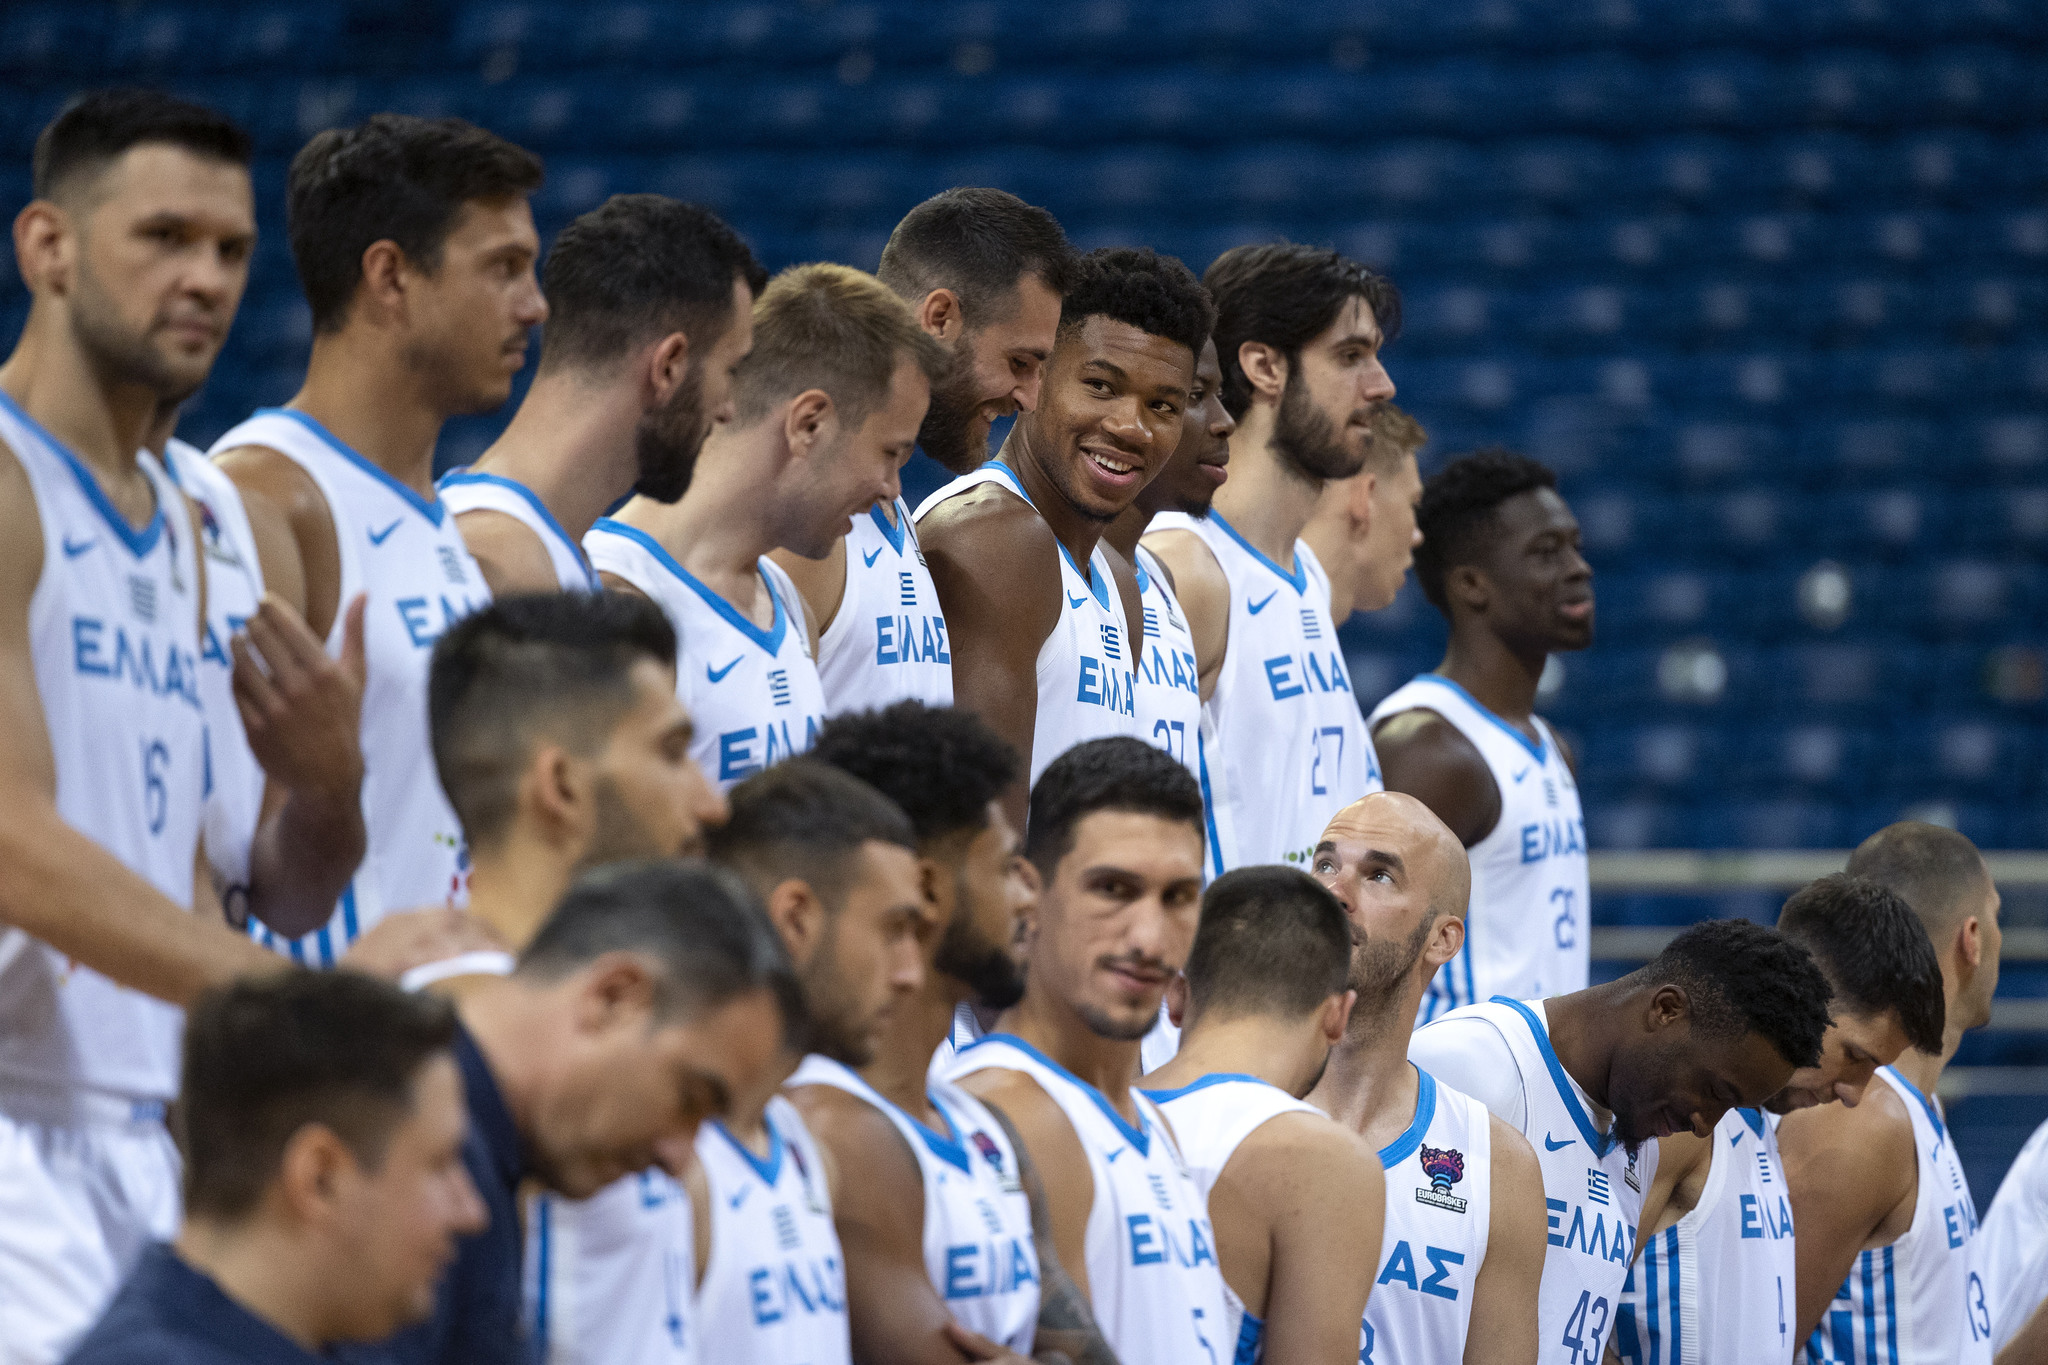 NBA basketball player  lt;HIT gt;Giannis lt;/HIT gt;  lt;HIT gt;Antetokounmpo lt;/HIT gt;, 5th right, smiles during a photo shoot of the Greek National team, in Athens, Saturday, Aug. 6, 2022. The two-time NBA MVP joined the team with his three brothers ahead of the FIBA Eurobasket 2022 event, due to start on Sept. 1. (AP Photo/Yorgos Karahalis)